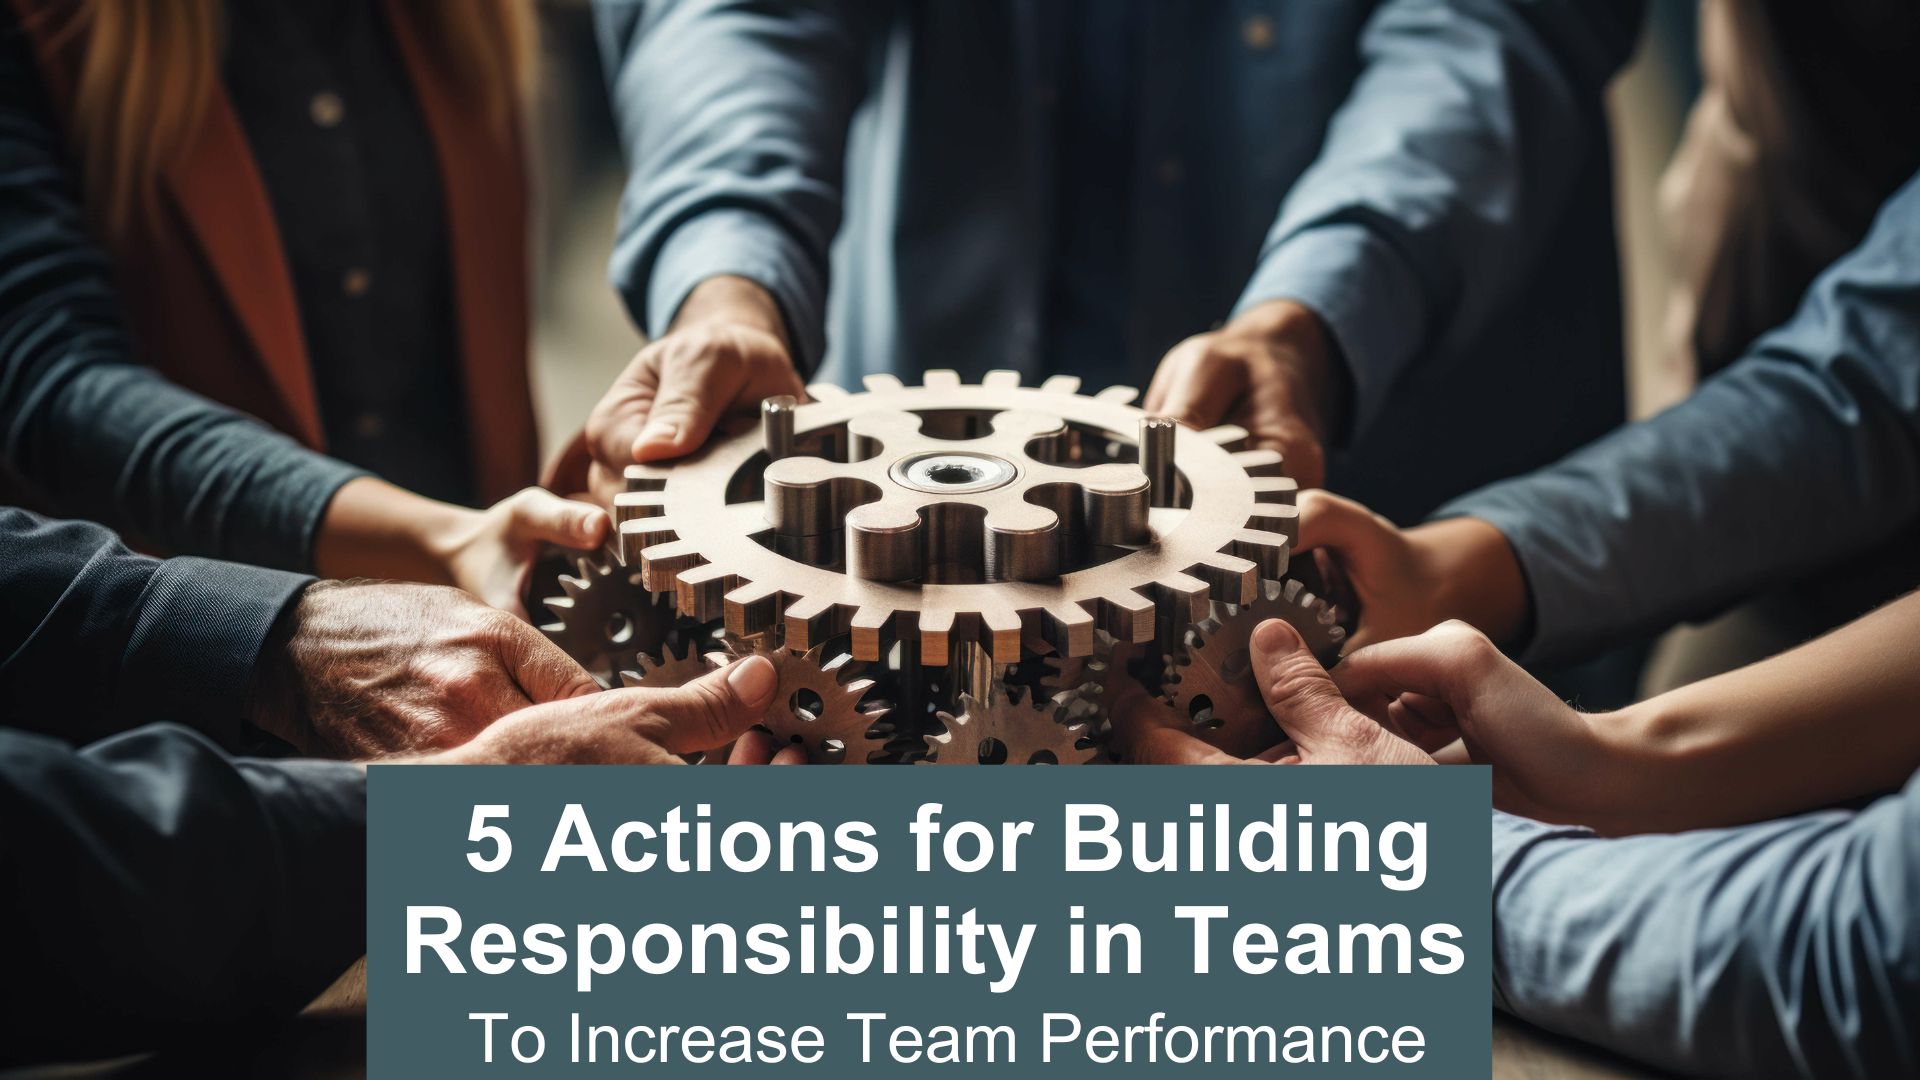 5 actions for building responsibility in teams to improve performance